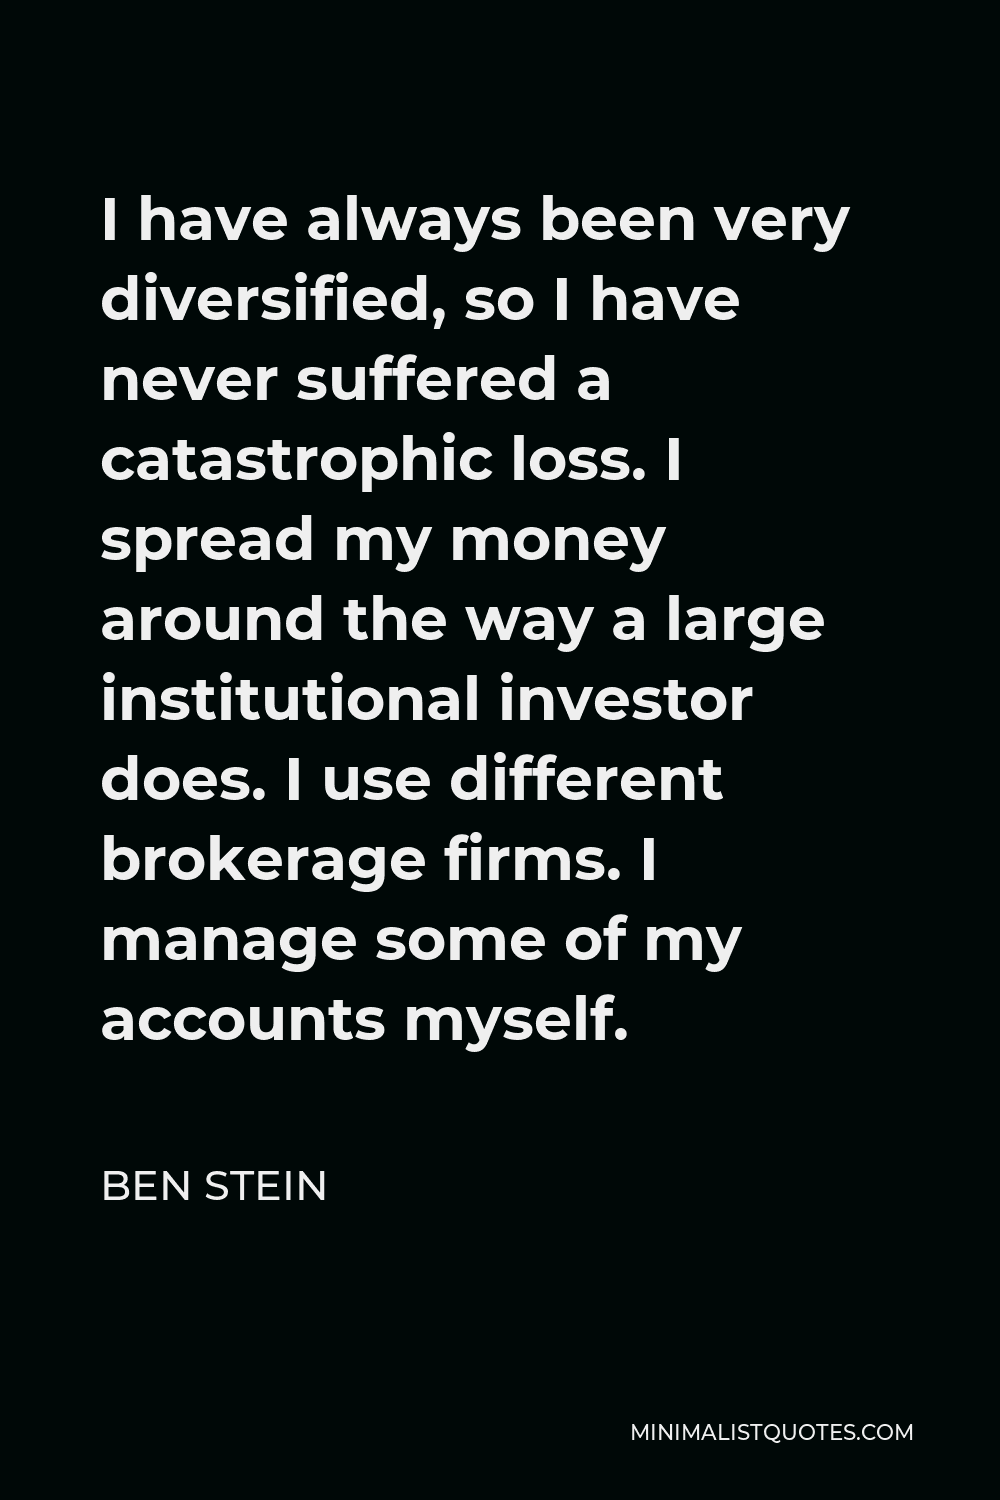 Ben Stein Quote - I have always been very diversified, so I have never suffered a catastrophic loss. I spread my money around the way a large institutional investor does. I use different brokerage firms. I manage some of my accounts myself.